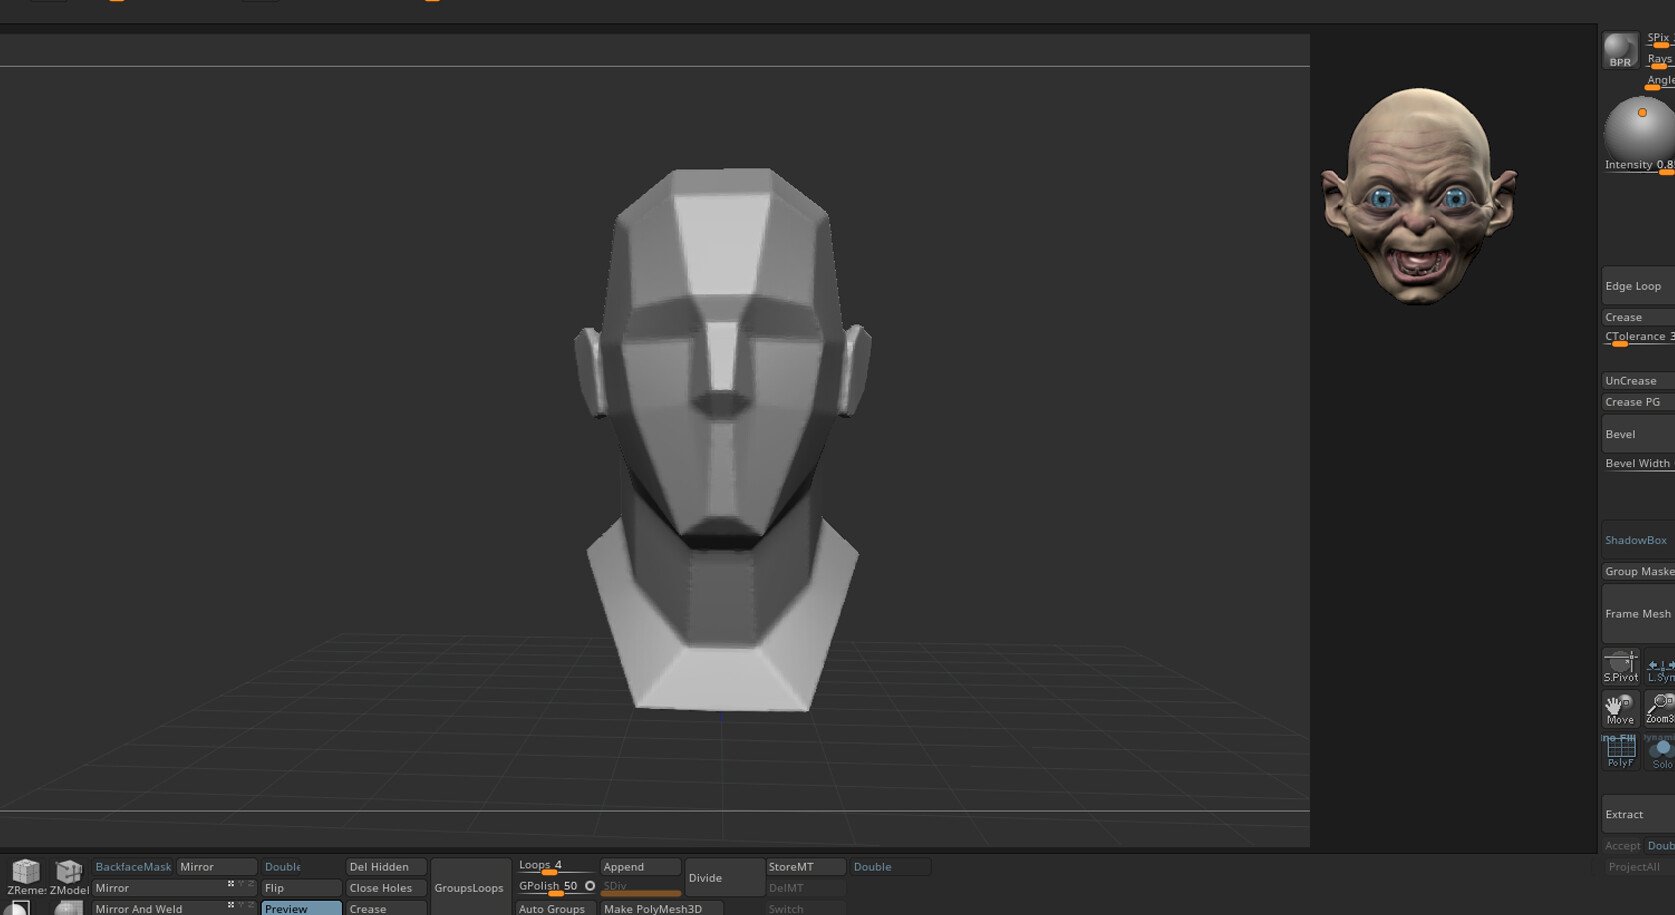 zbrush camview not showing